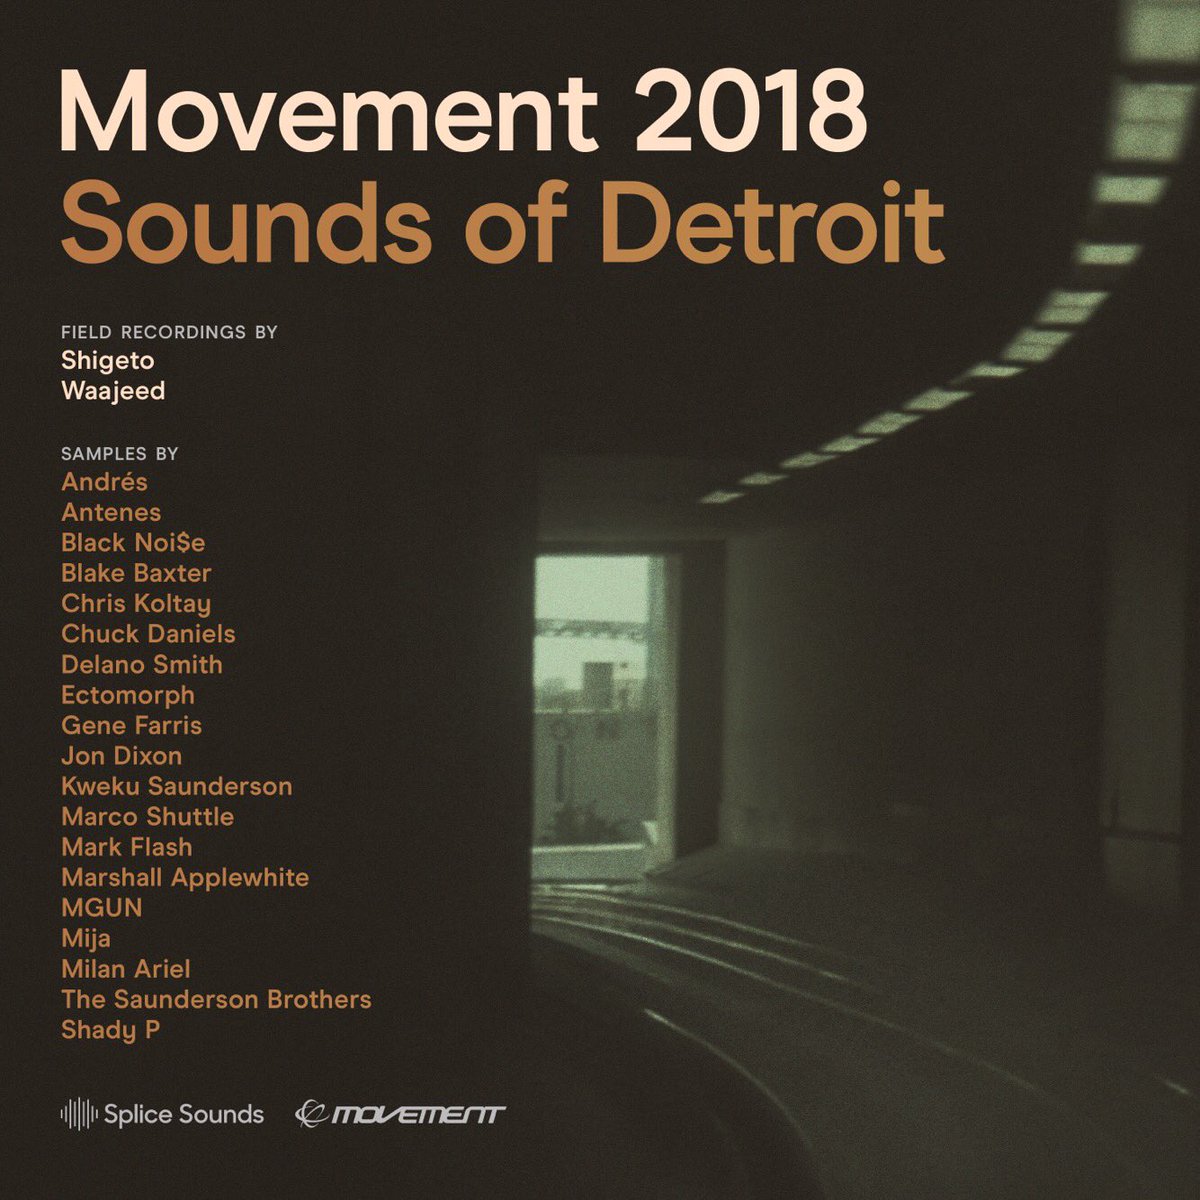 Splice and Movement 2018 partner to release a Sounds of Detroit, featuring 20+ Artists from Movement 2018 Lineup